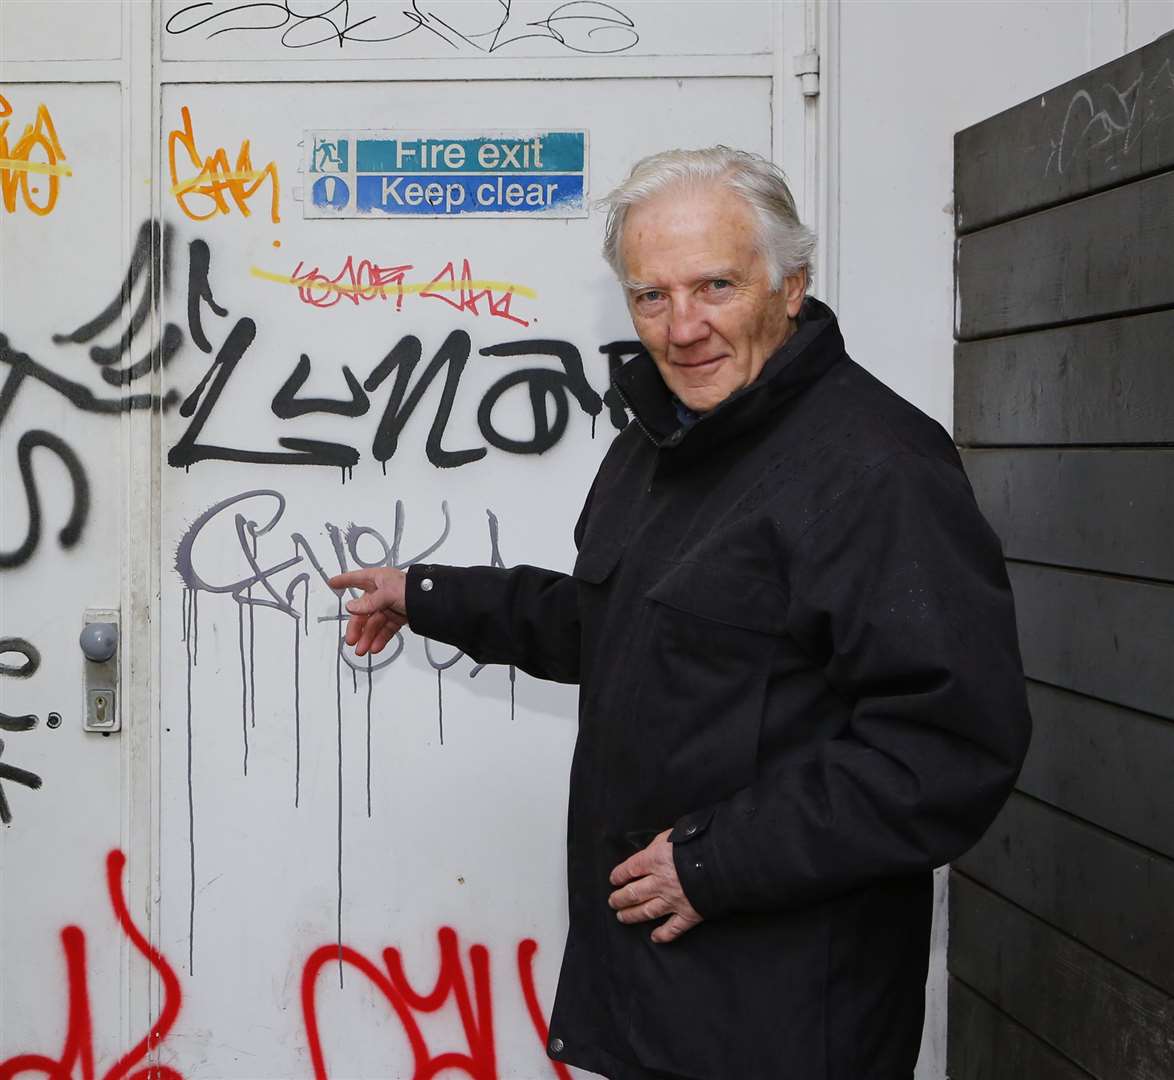 Cllr Michael Dixey has concerns about graffiti in Canterbury. Picture: Andy Jones